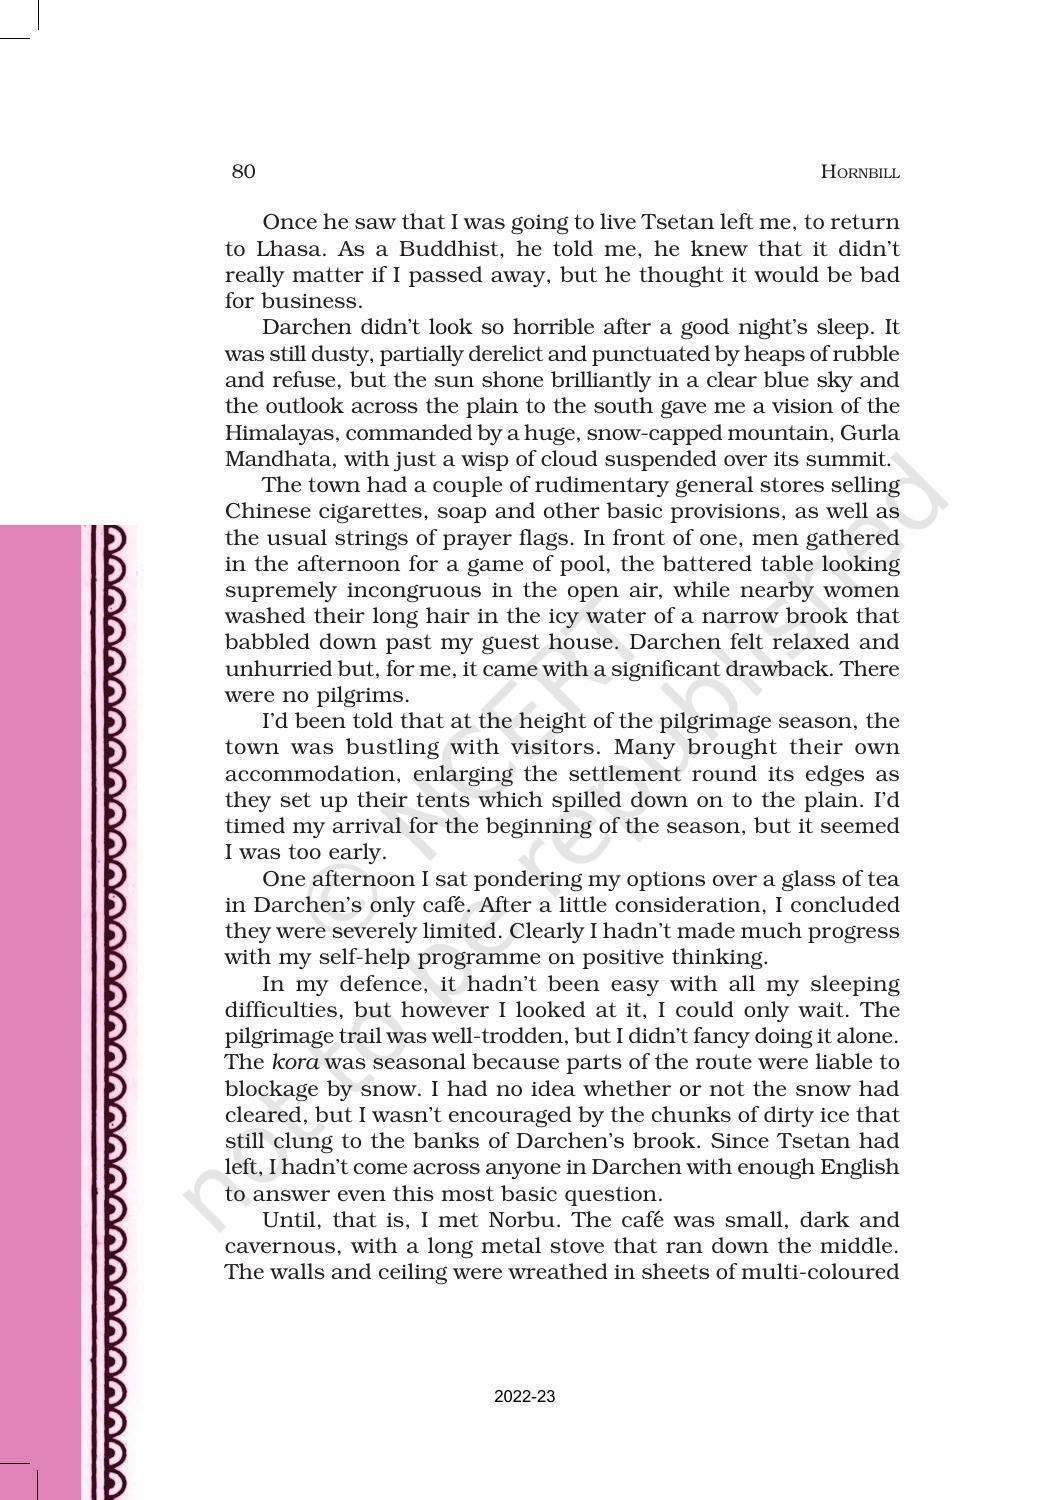 NCERT Book for Class 11 English Hornbill Chapter 8 Silk Road - Page 7